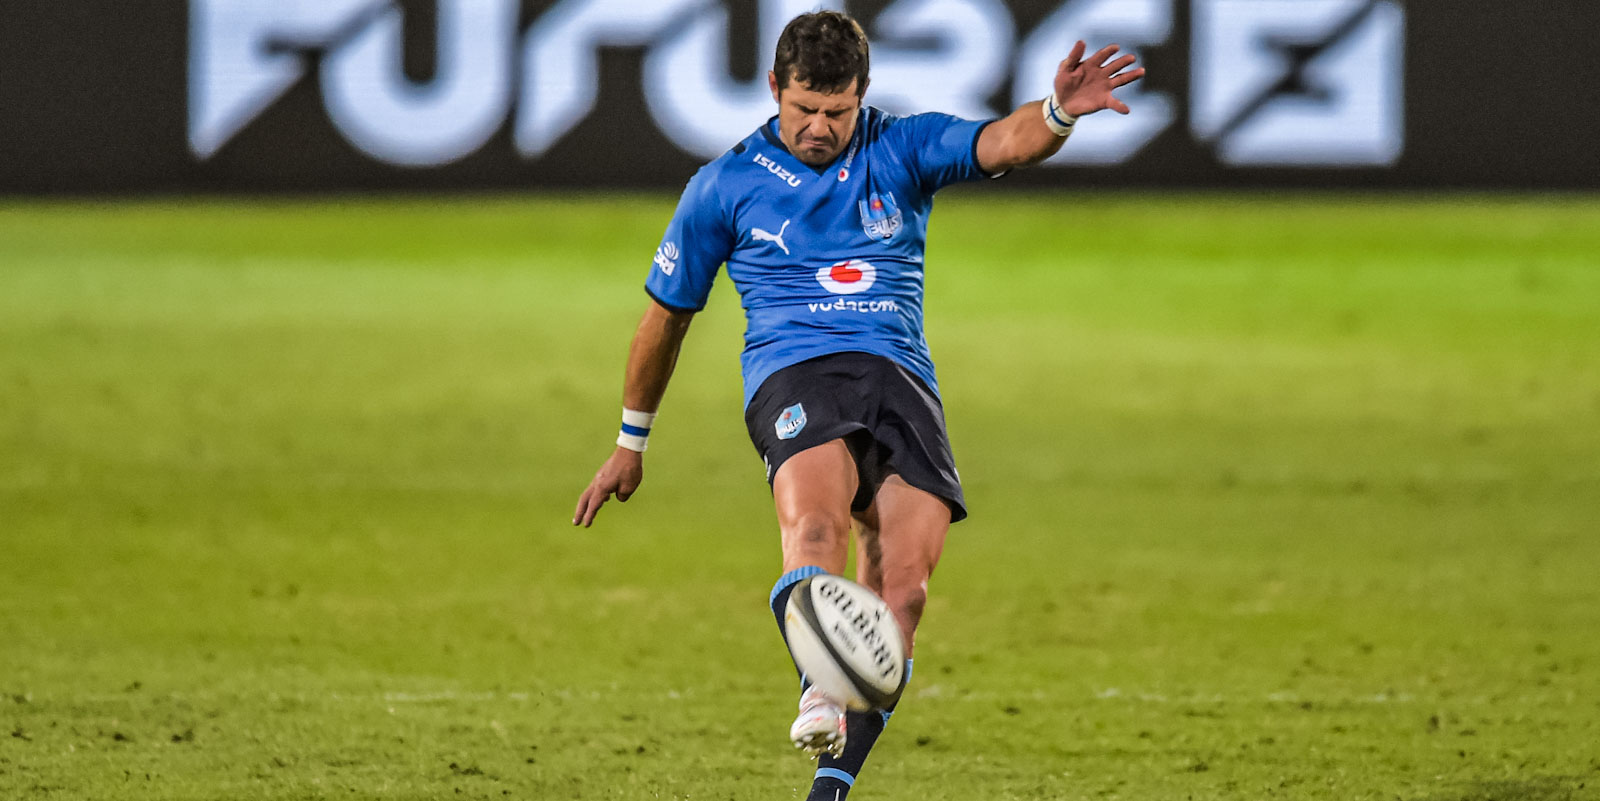 Morne Steyn kicked 19 points in a dominant display by the Vodacom Bulls.